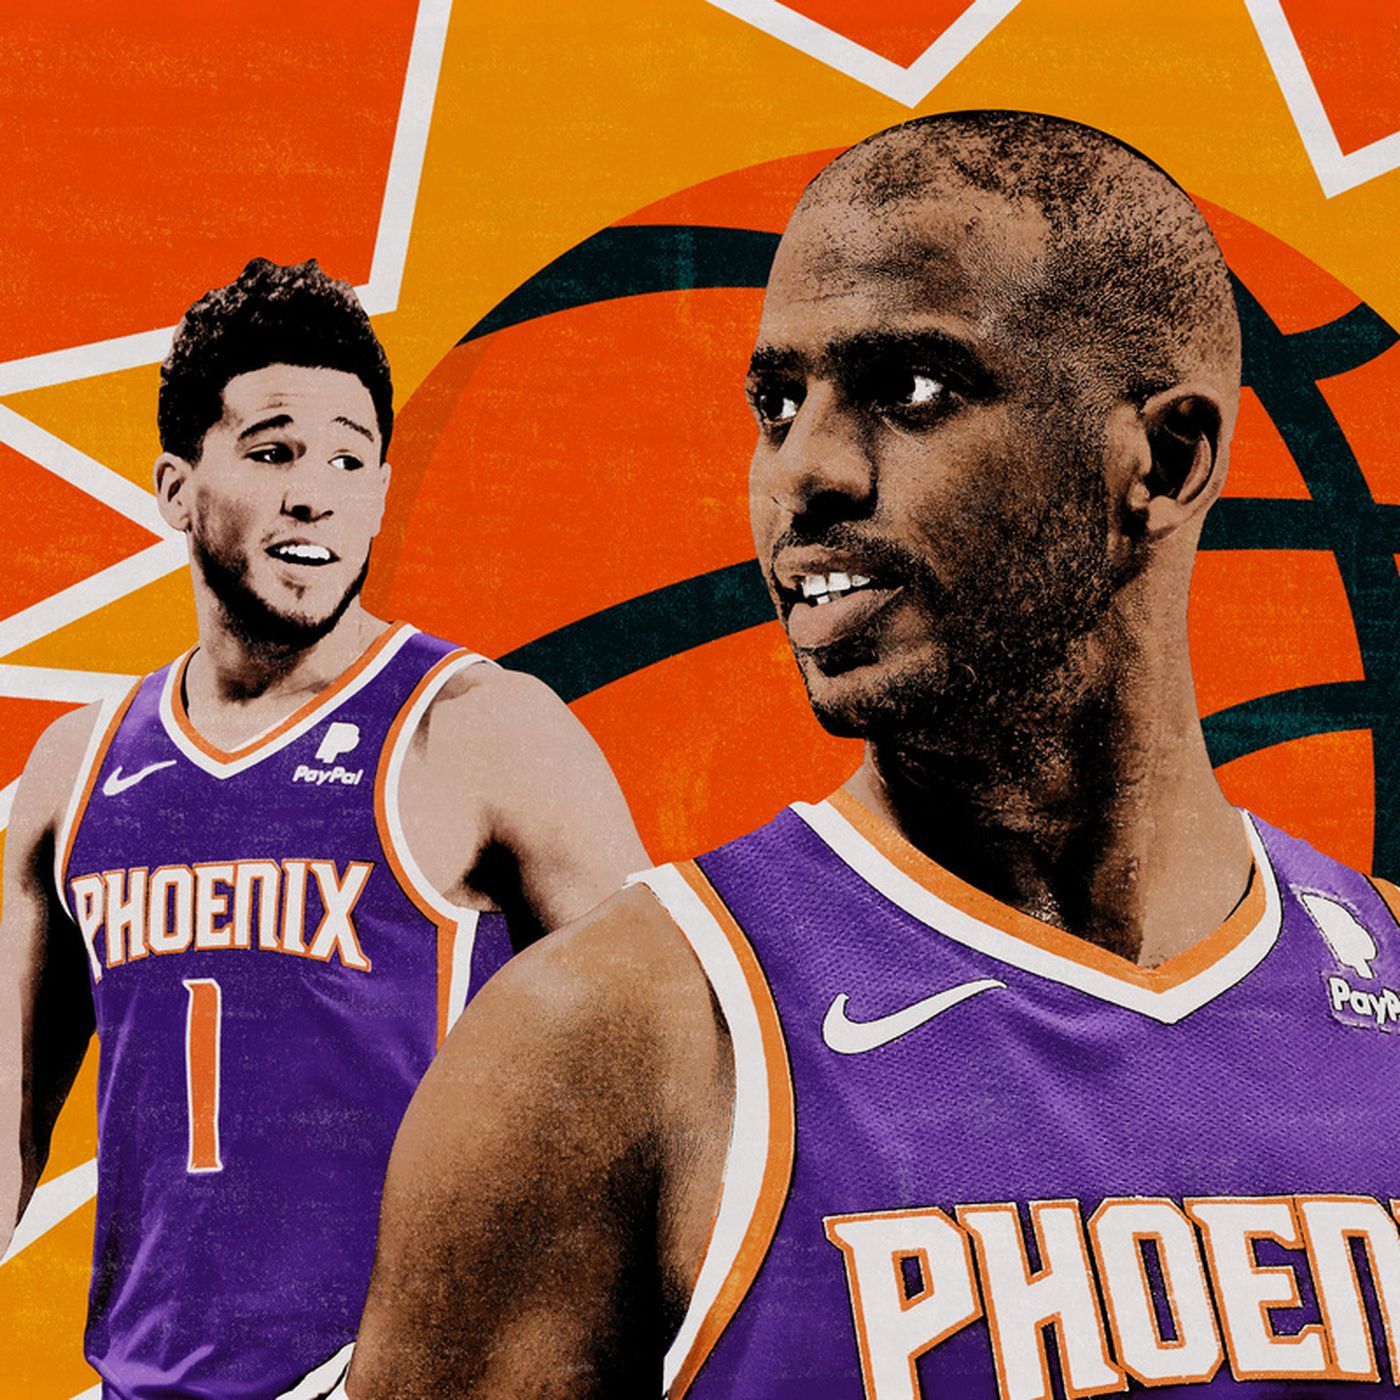 Before Sunset: For His Final Act, Chris Paul Will Try to Turn Phoenix Back Into a Winner